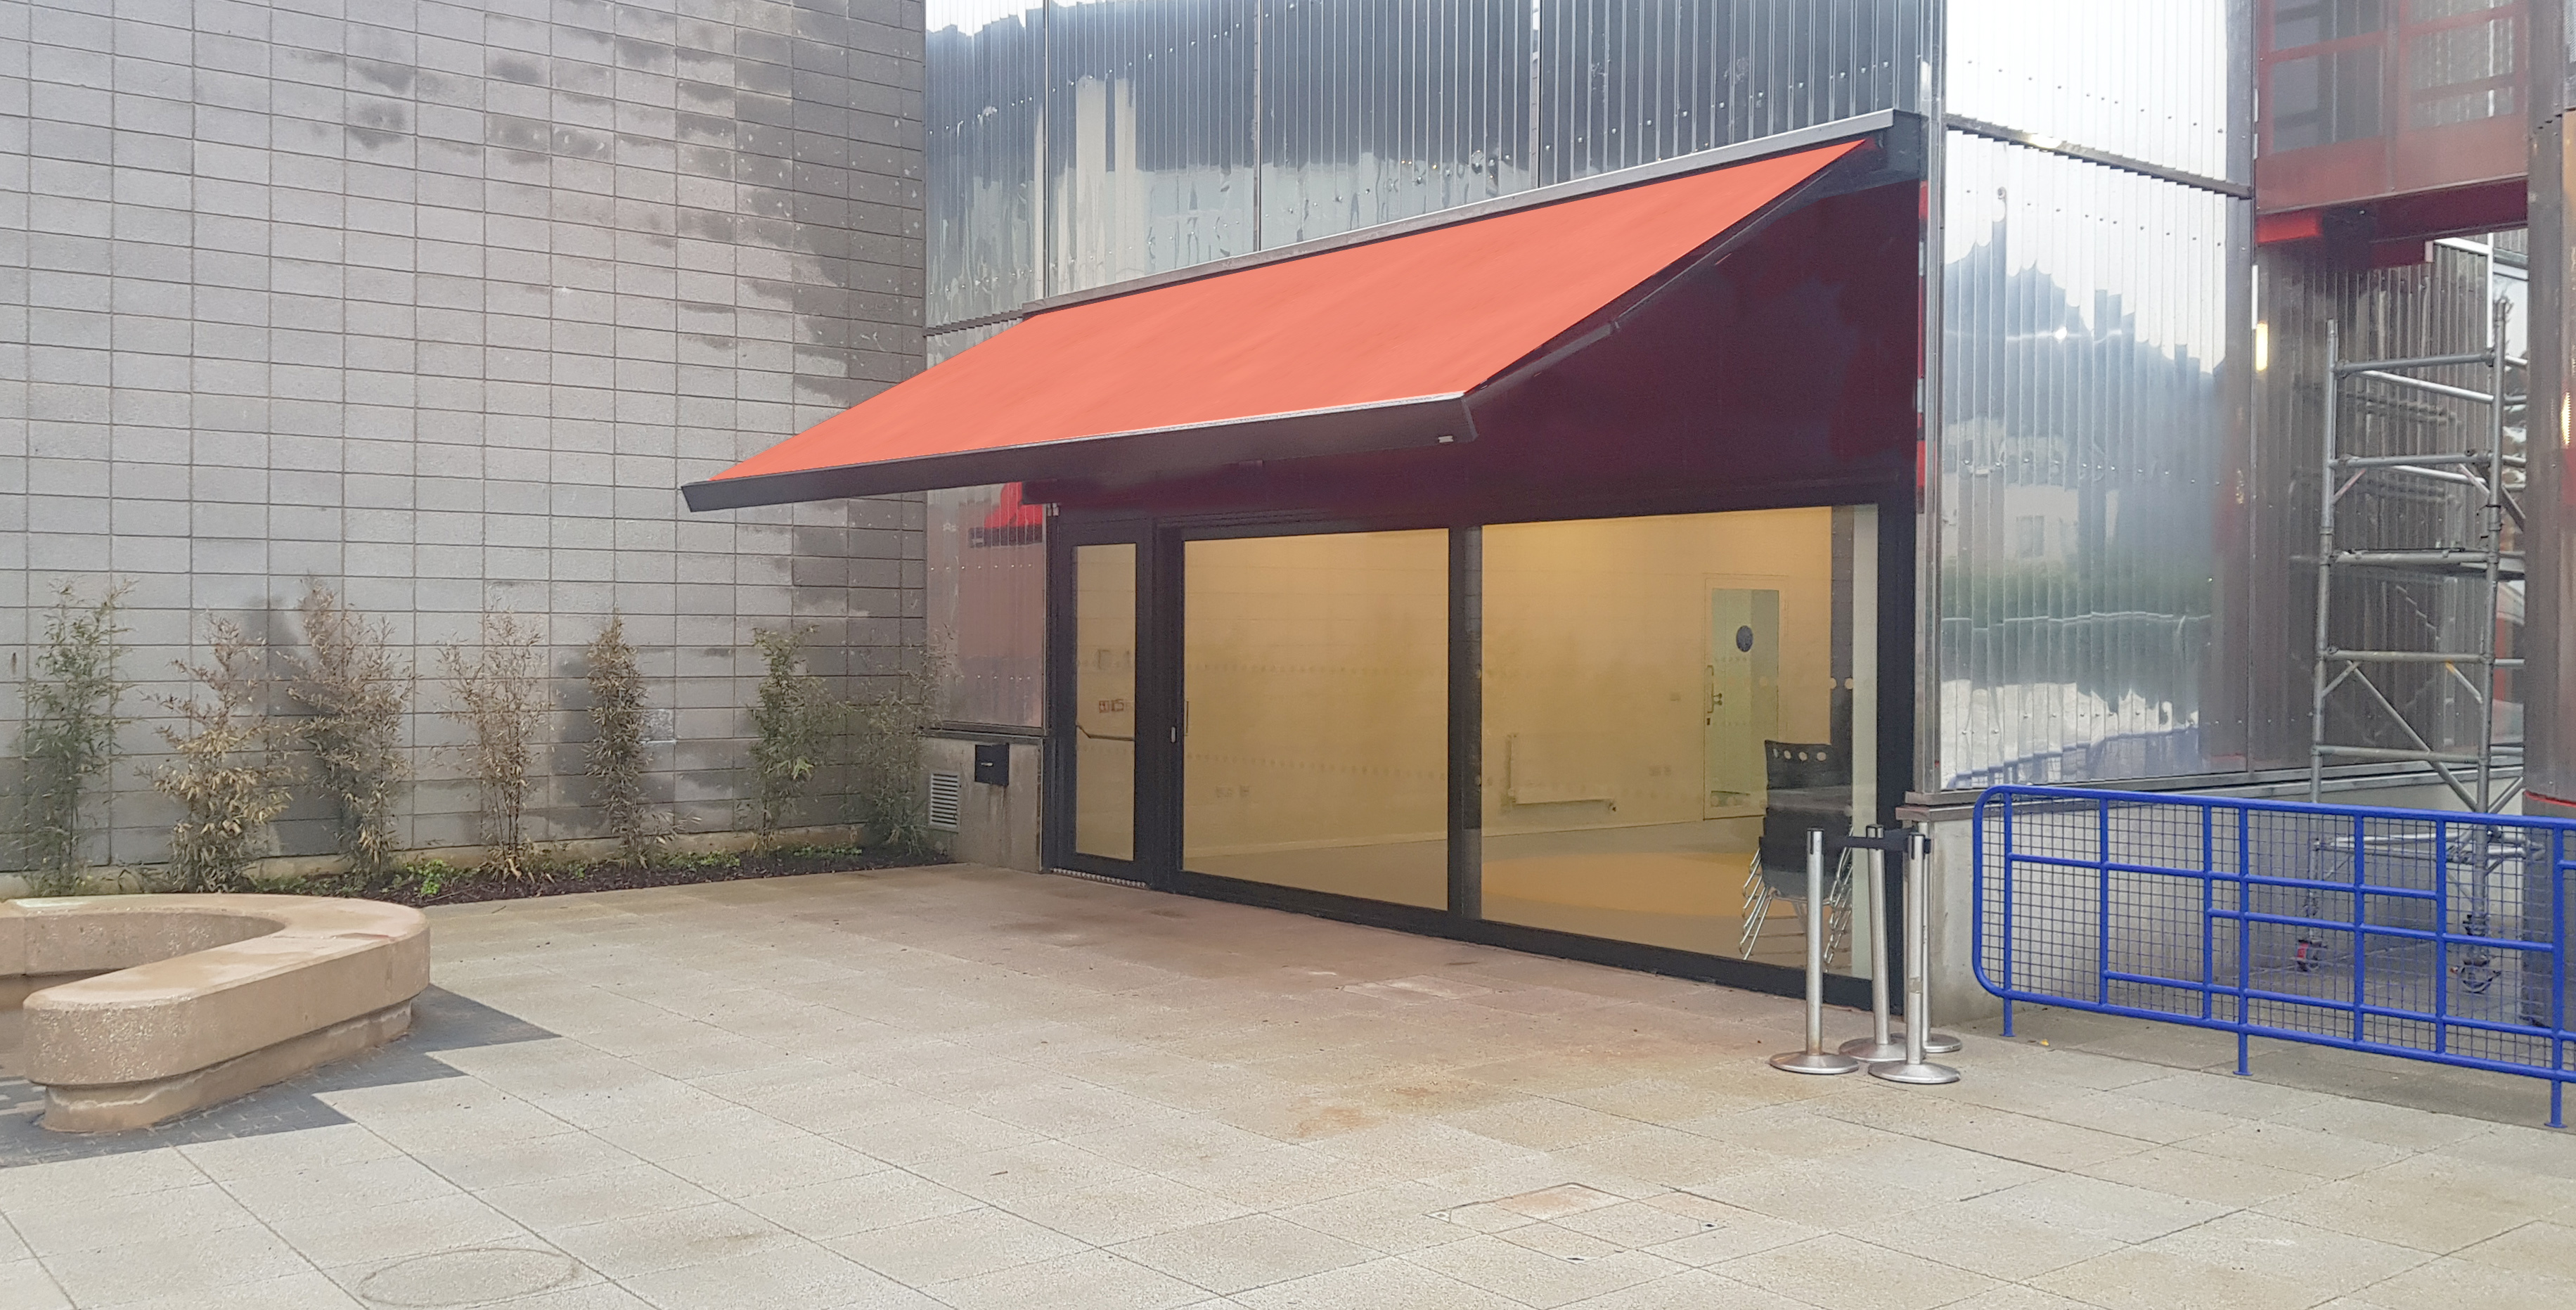 SQ2 awning for MK Gallery